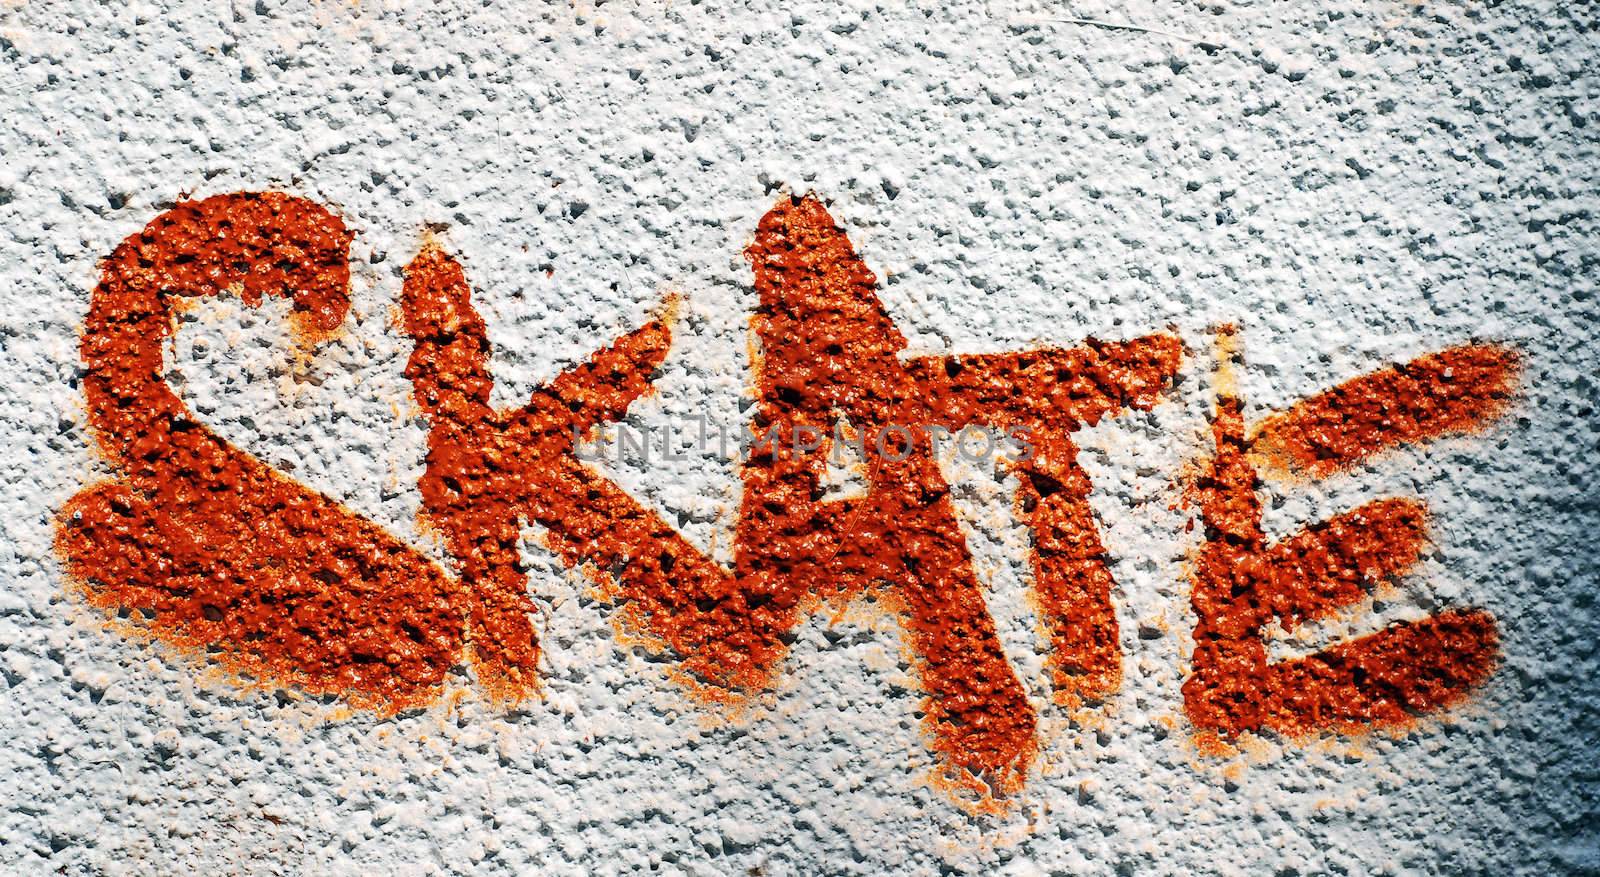 A photograph of the word Skate graffitied on the wall of a public skate park.